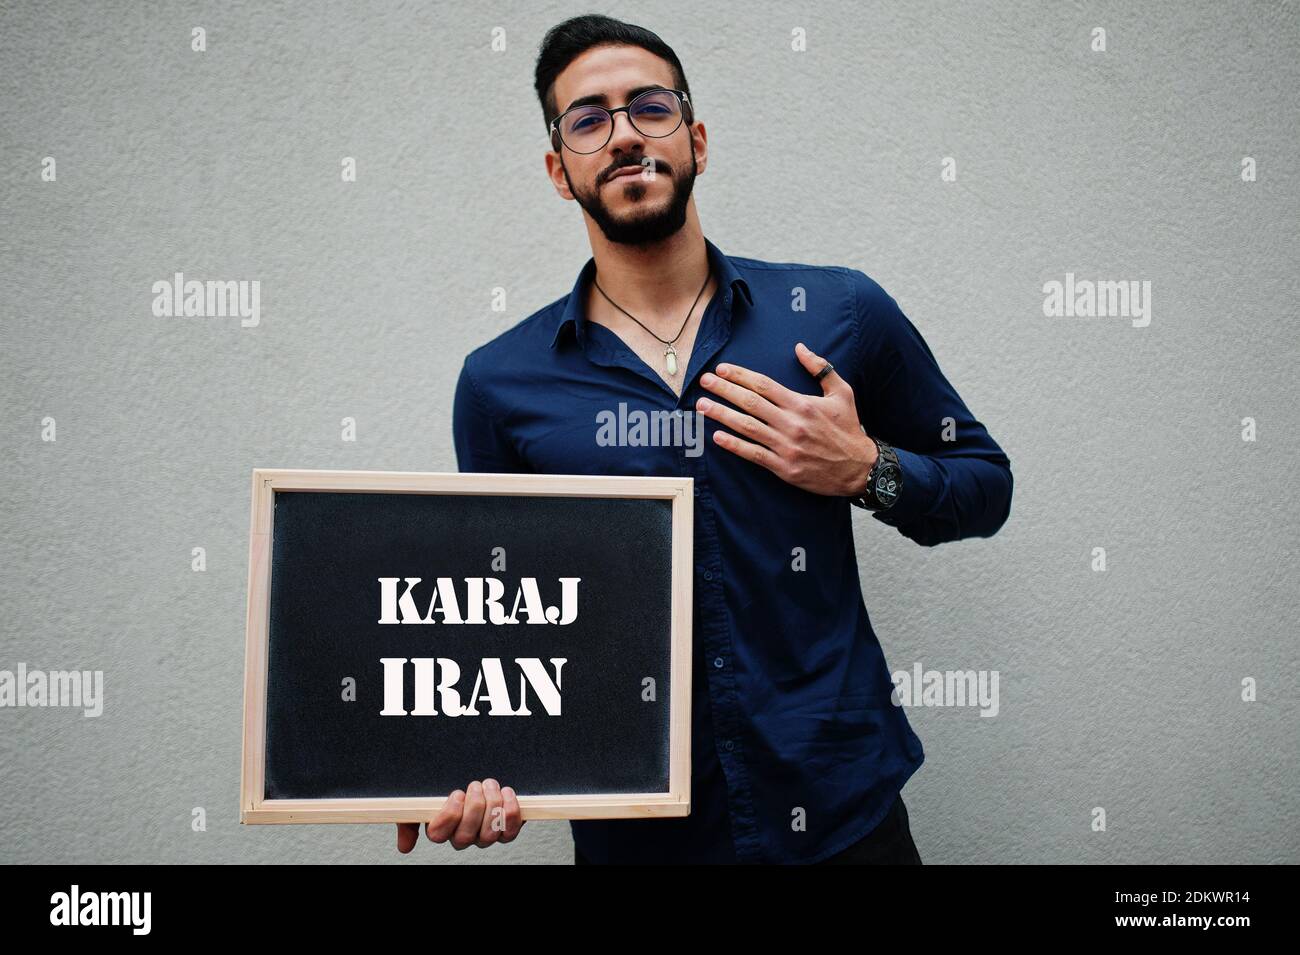 Arab man wear blue shirt and eyeglasses hold board with Karaj Iran inscription. Largest cities in islamic world concept. Stock Photo